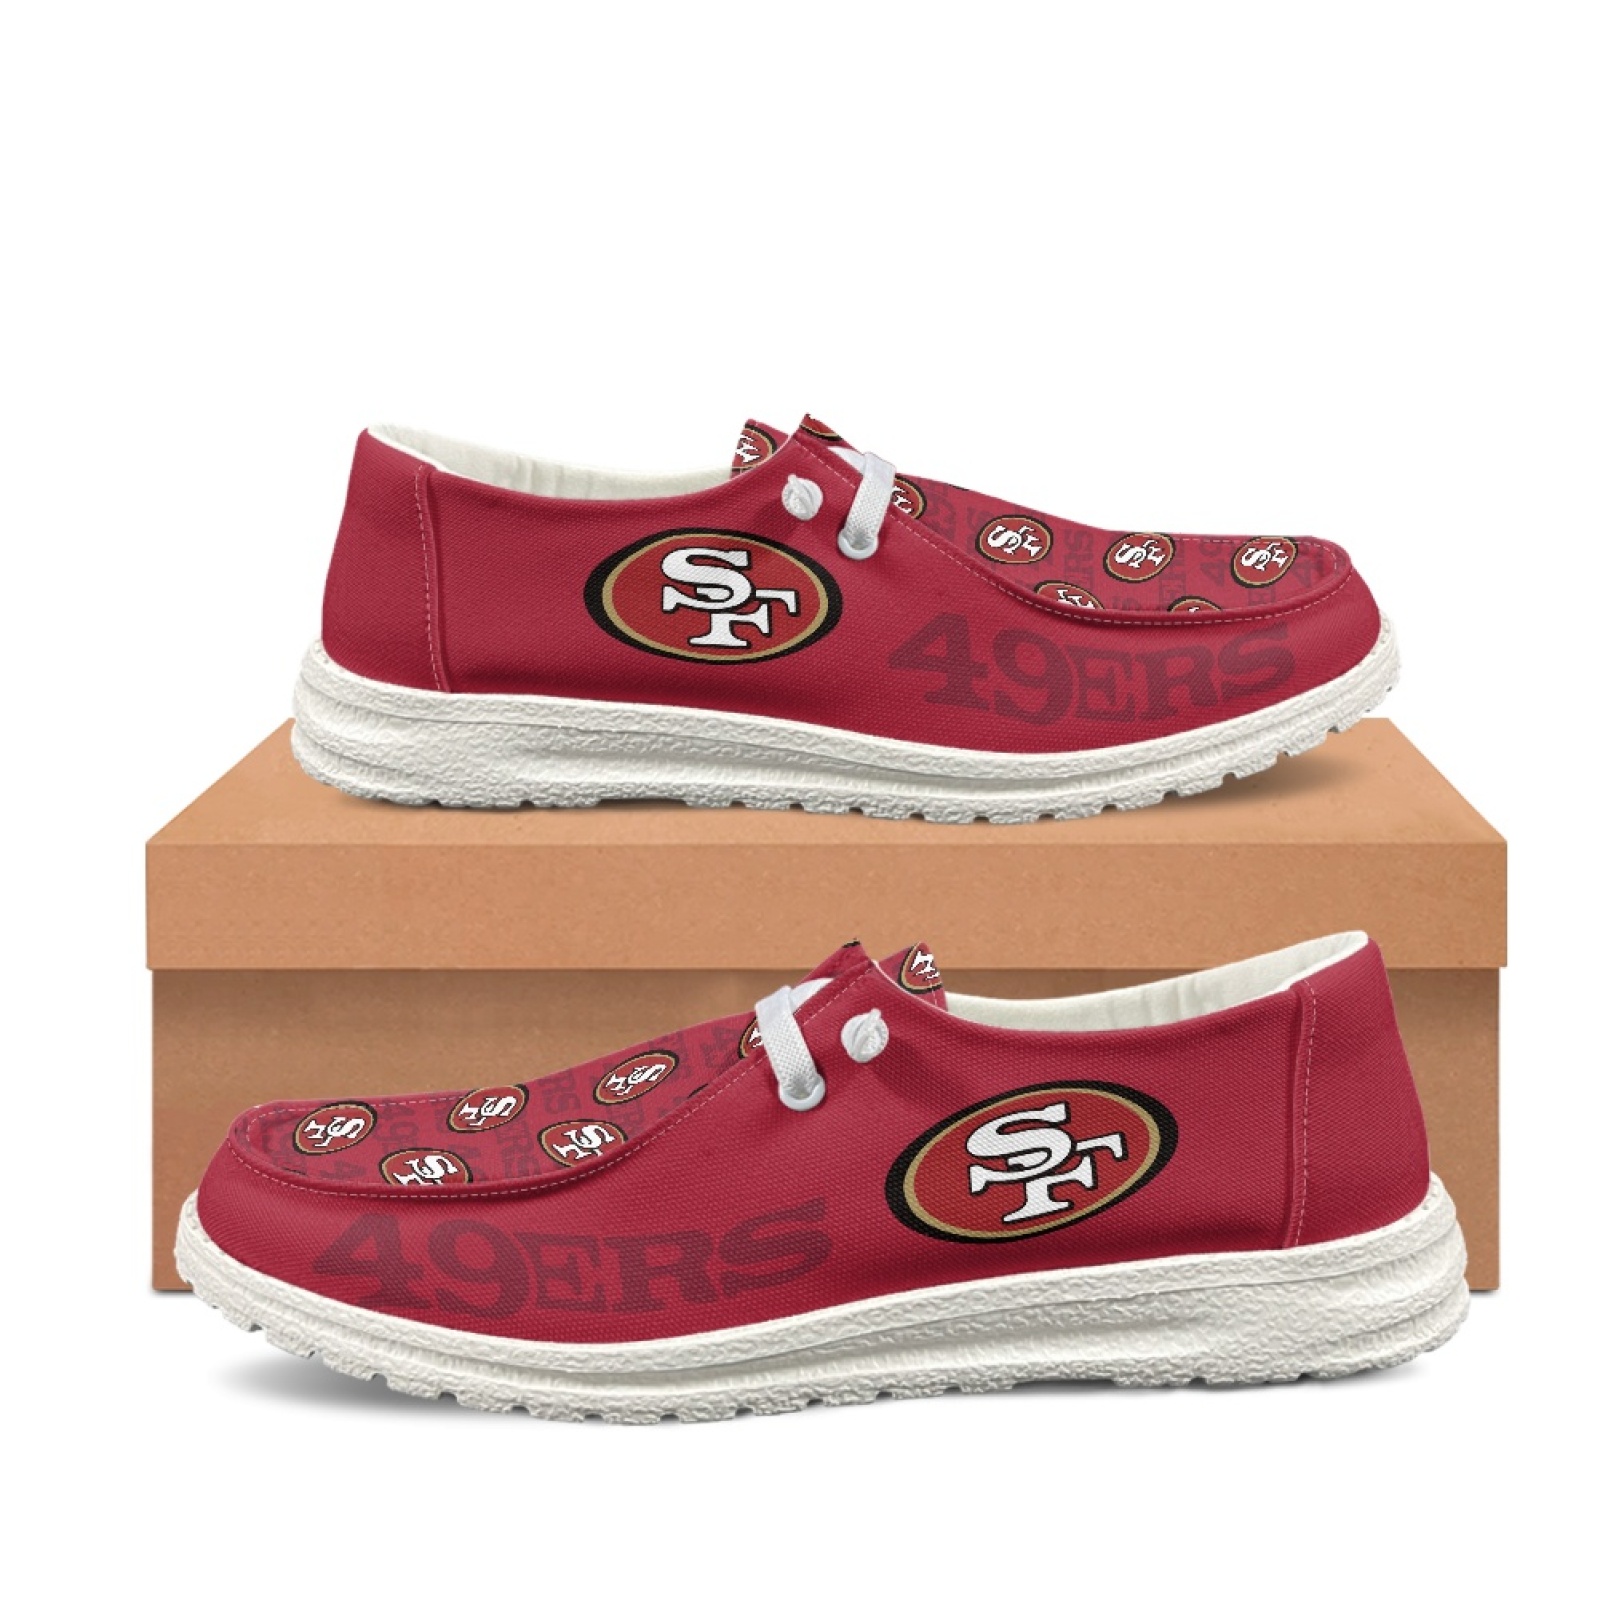 San Francisco 49ers Tribute Edition Hey Dude Shoes